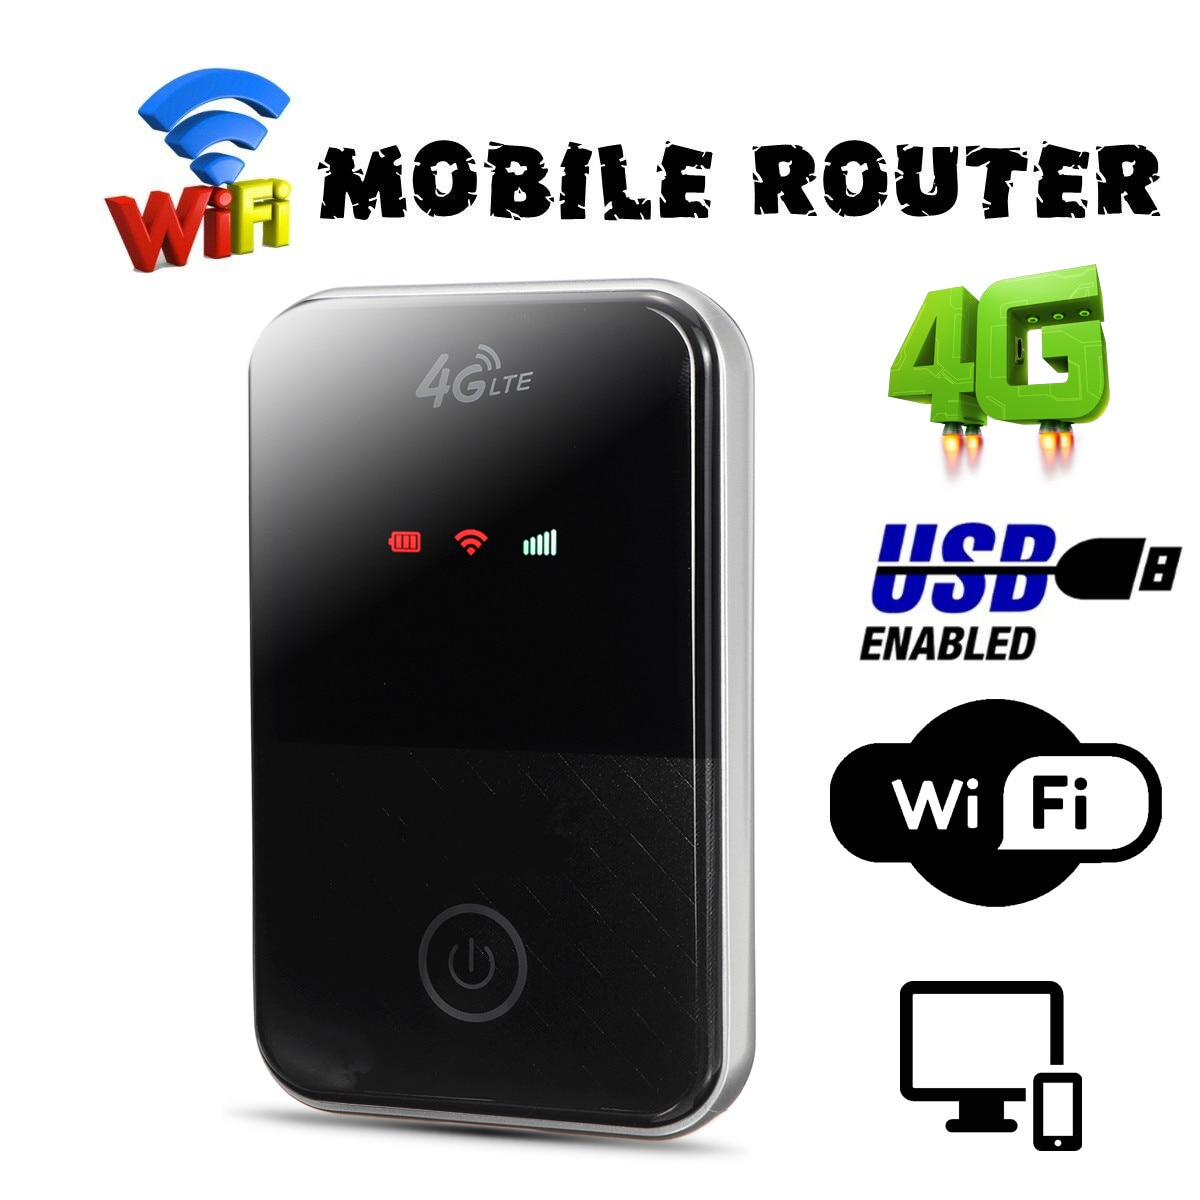 Tragbare 4G LTE Wifi Router kabellos Tasche Router Wifi FDD B1 B3 B7 B8 B20 WCDMA B1 B5 B8 Standard Sim Karte 150mbps